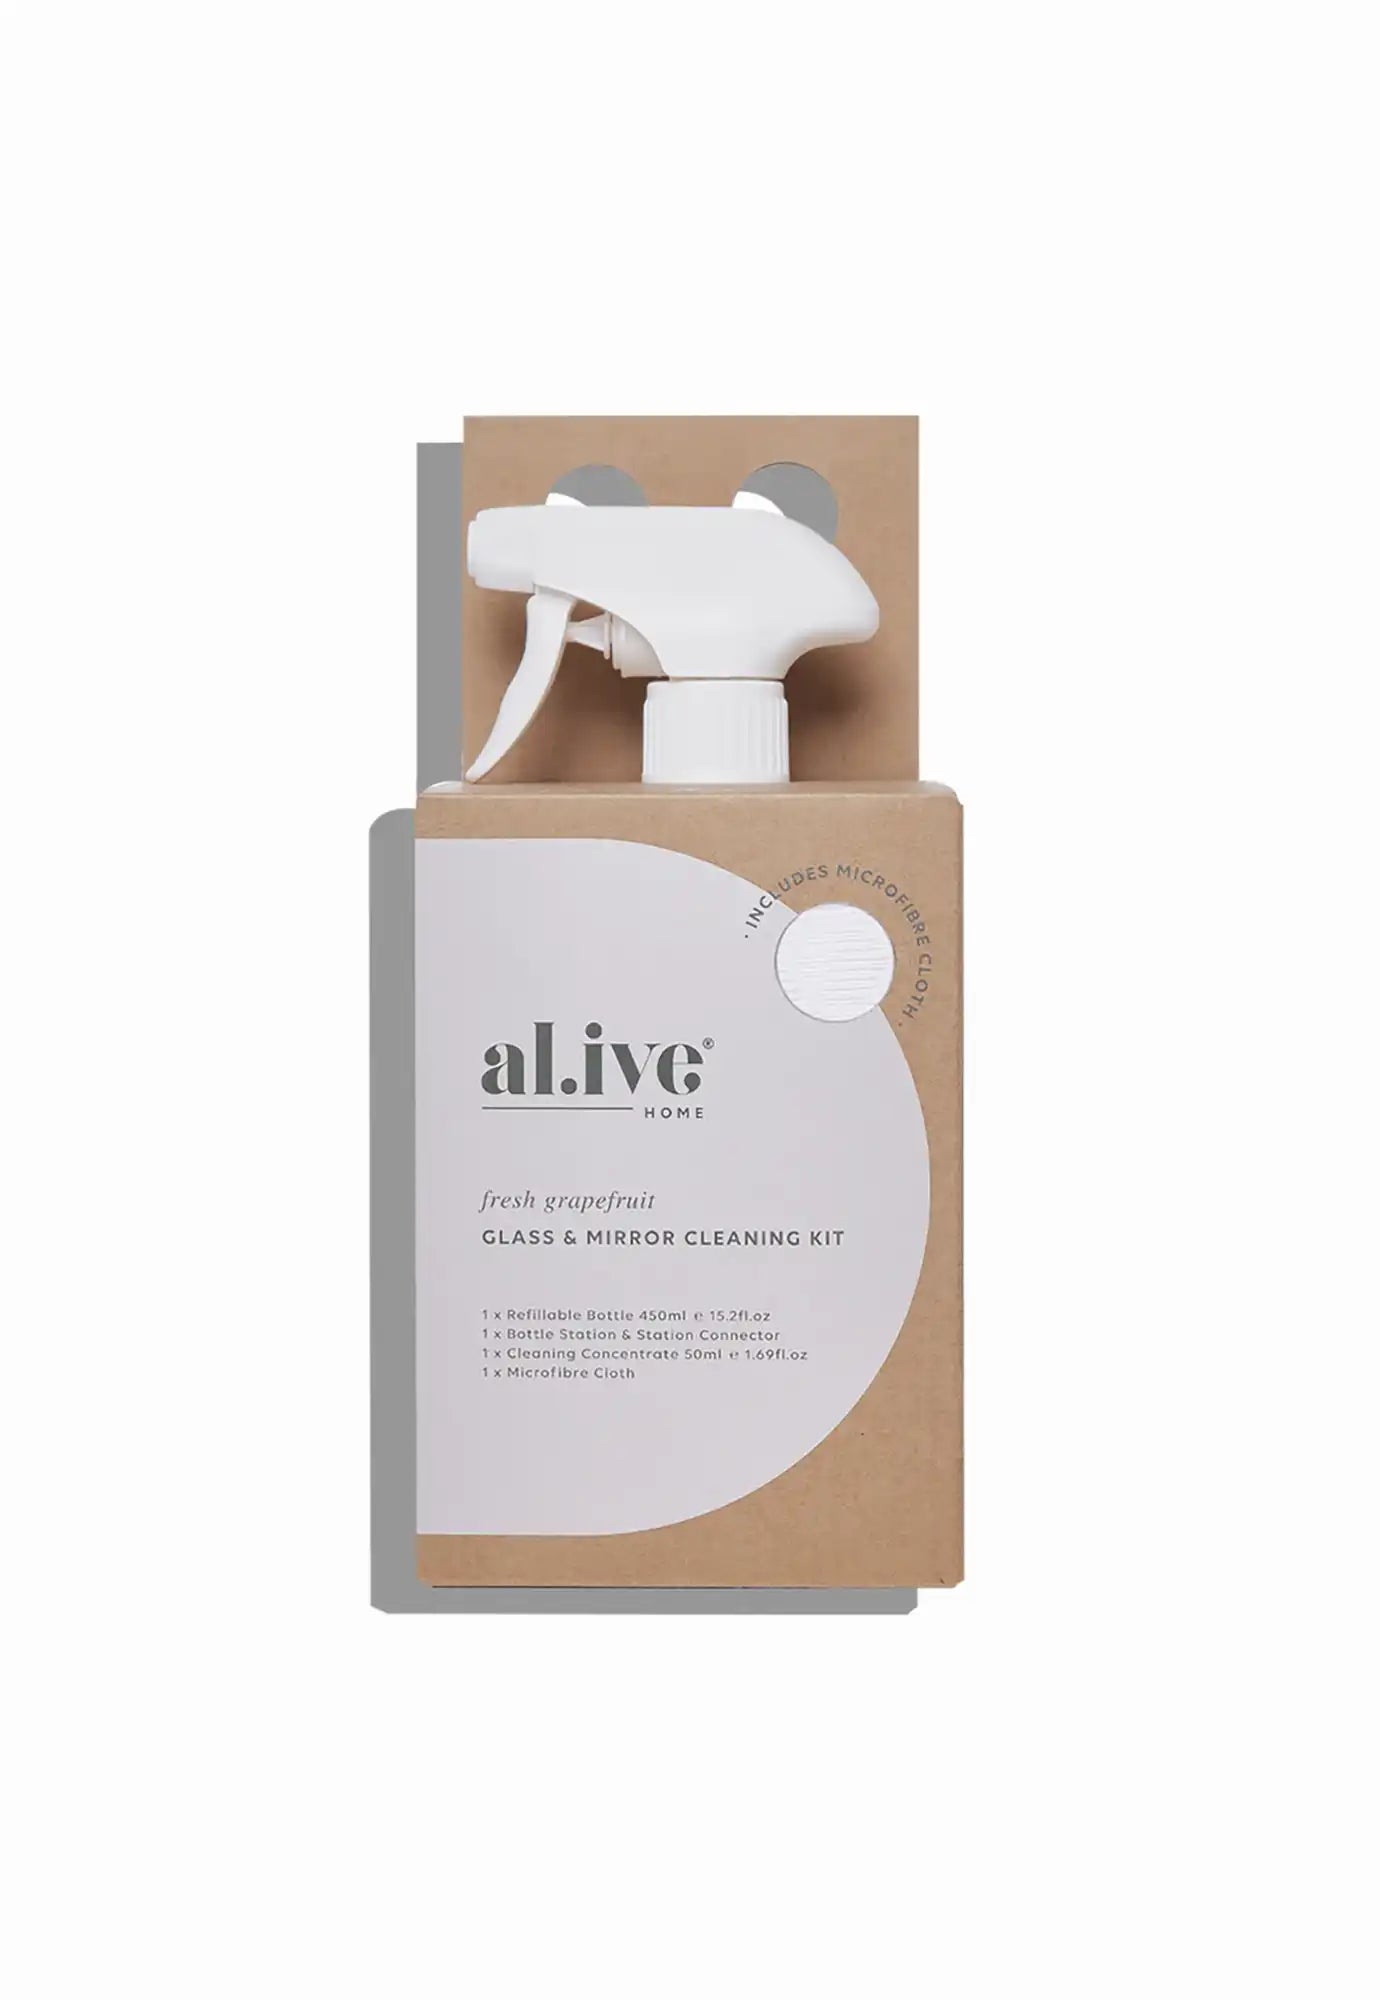 al.ive - home cleaning kits